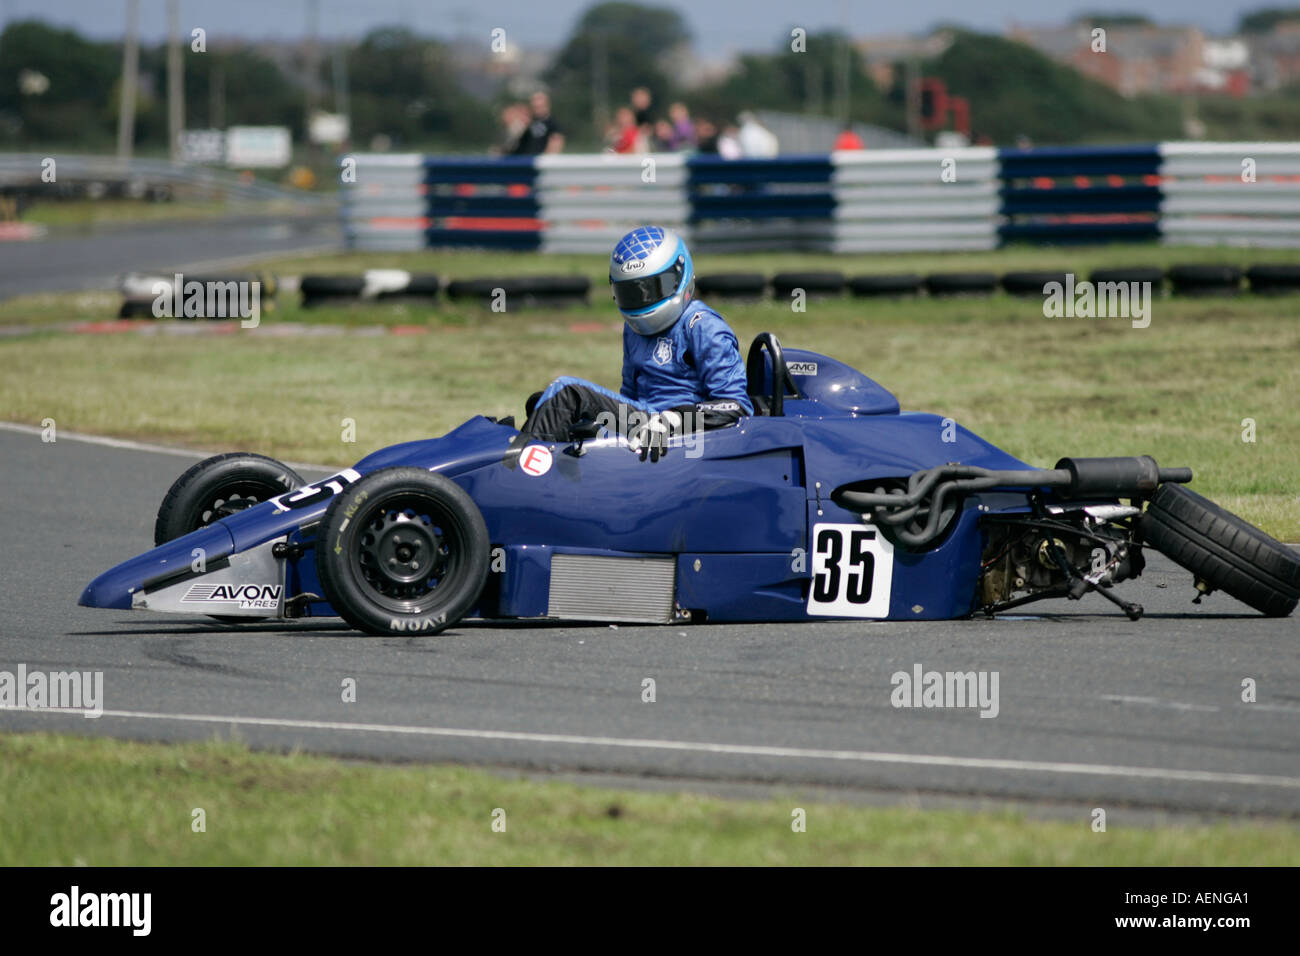 Kris Loane from Kesh climbs out of his crashed blue Van Diemen RF92 Formula Ford FF 1600 at Kirkistown Circuit county down Stock Photo